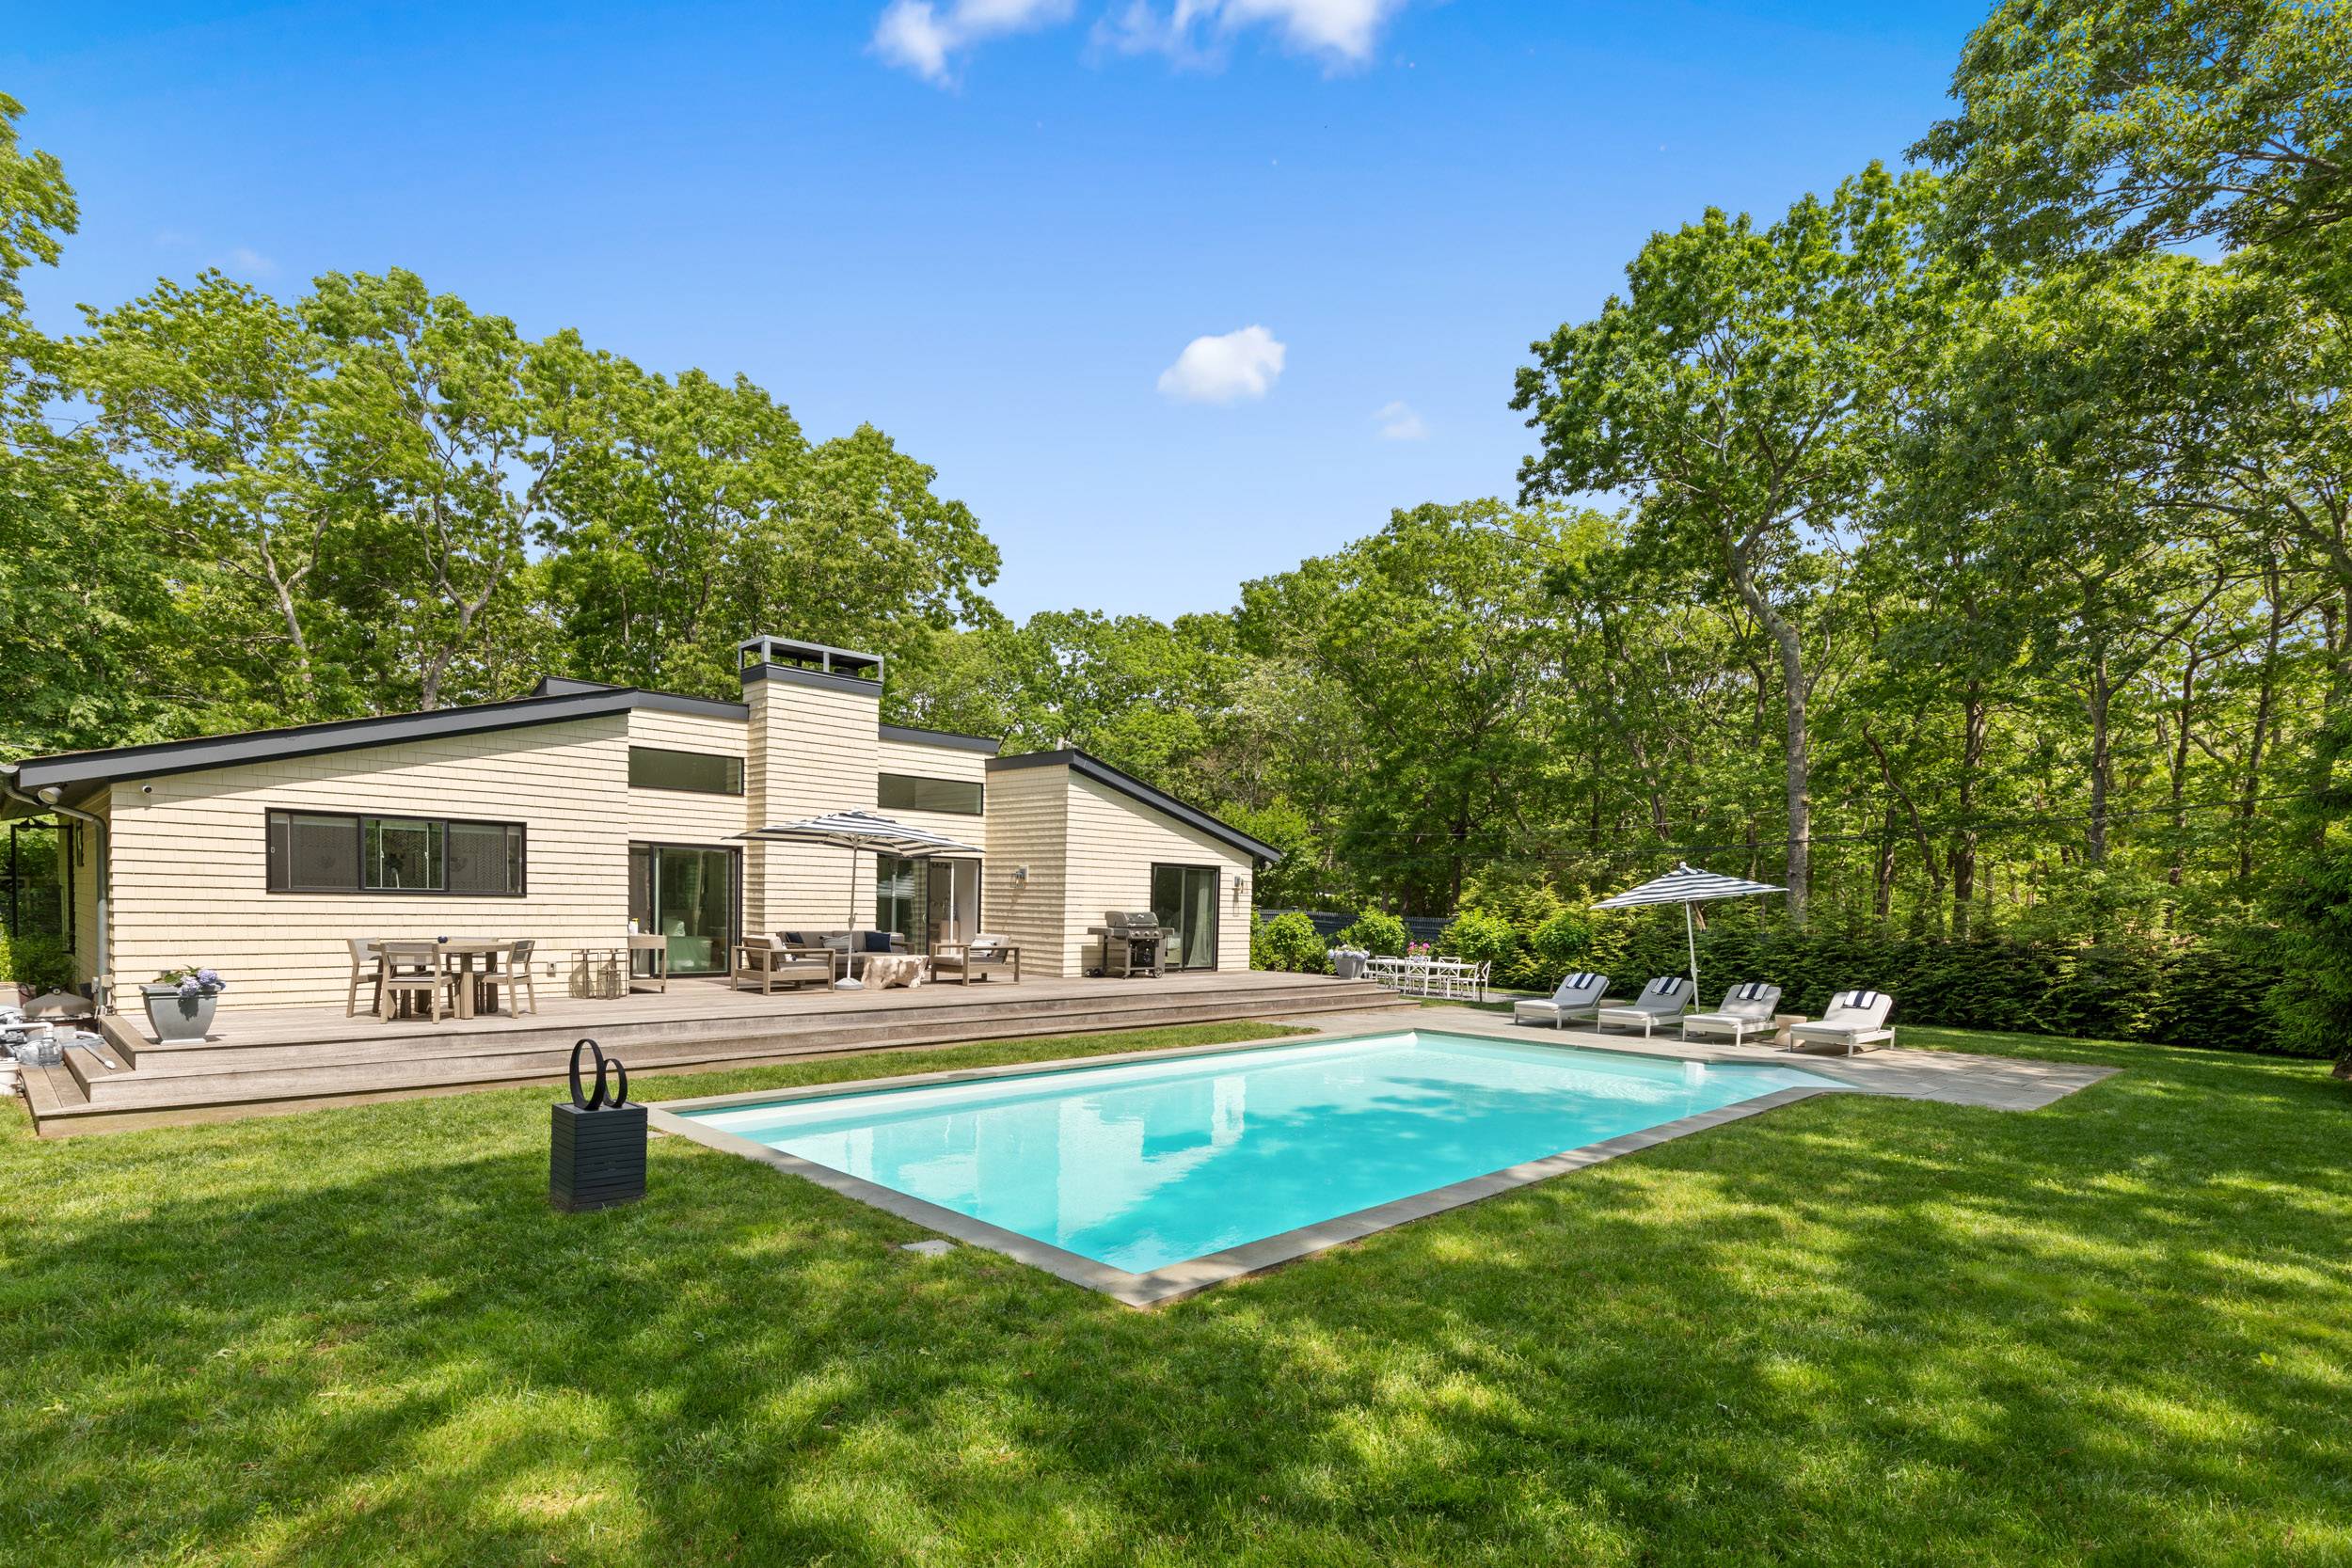 Privacy is Paramount at this East Hampton August Rental